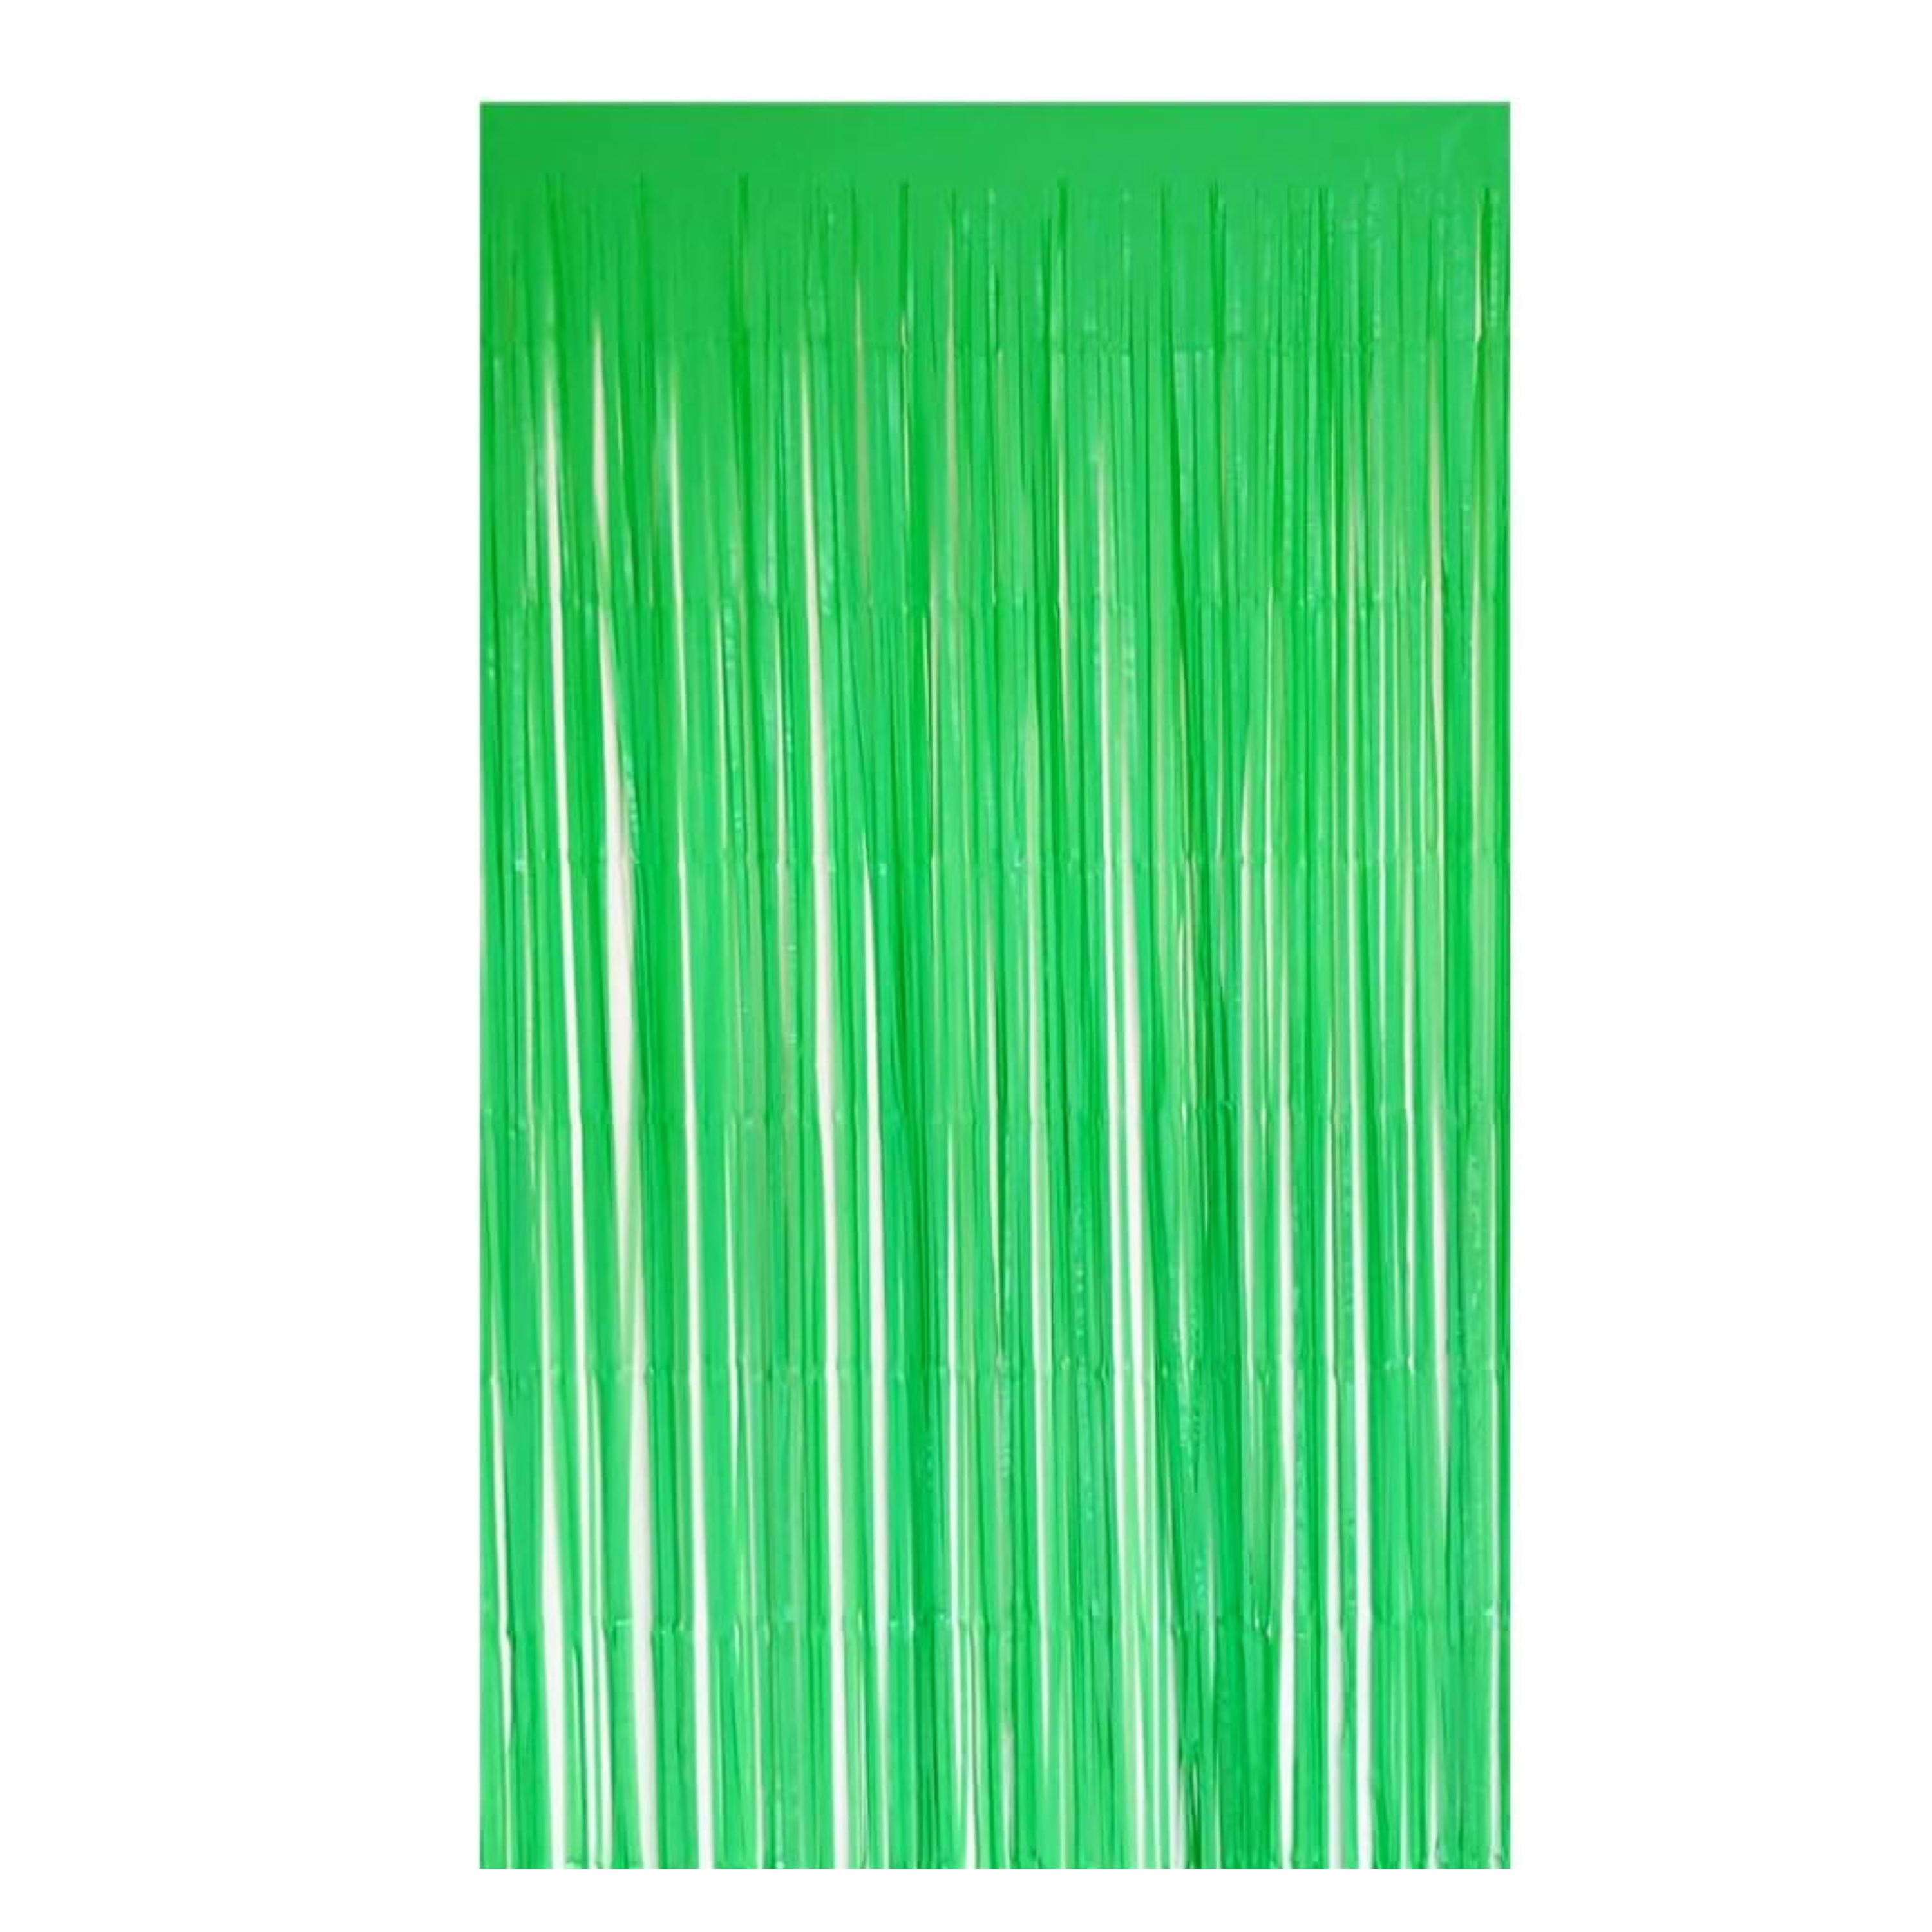 Pastel Curtain Green 3ft x 6ft - 1 Ct.